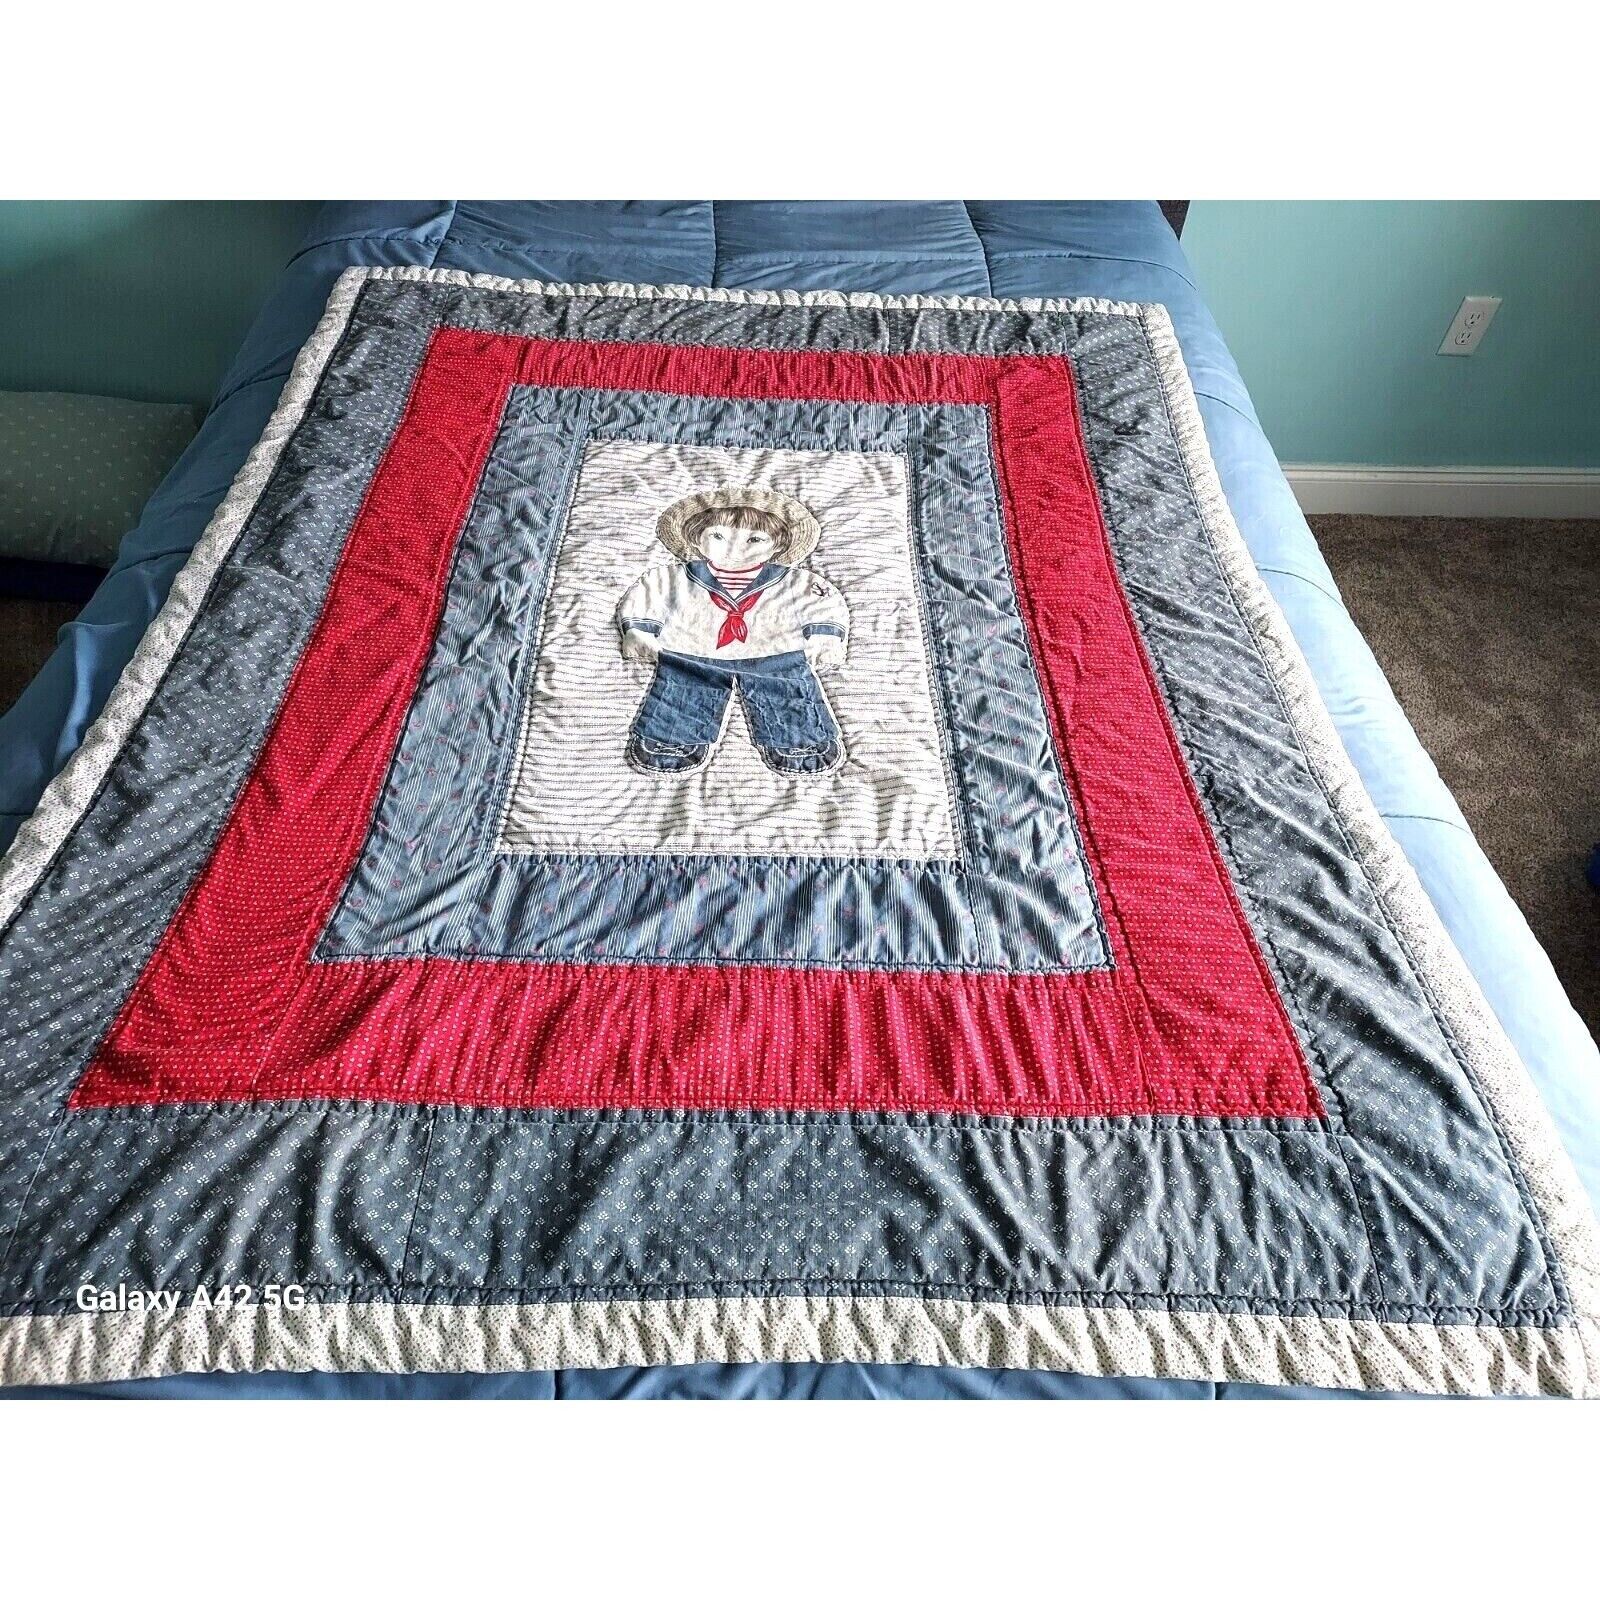 Vintage Baby Quilt Hand Sewn Nautical Saylor Boys 55x44 inches